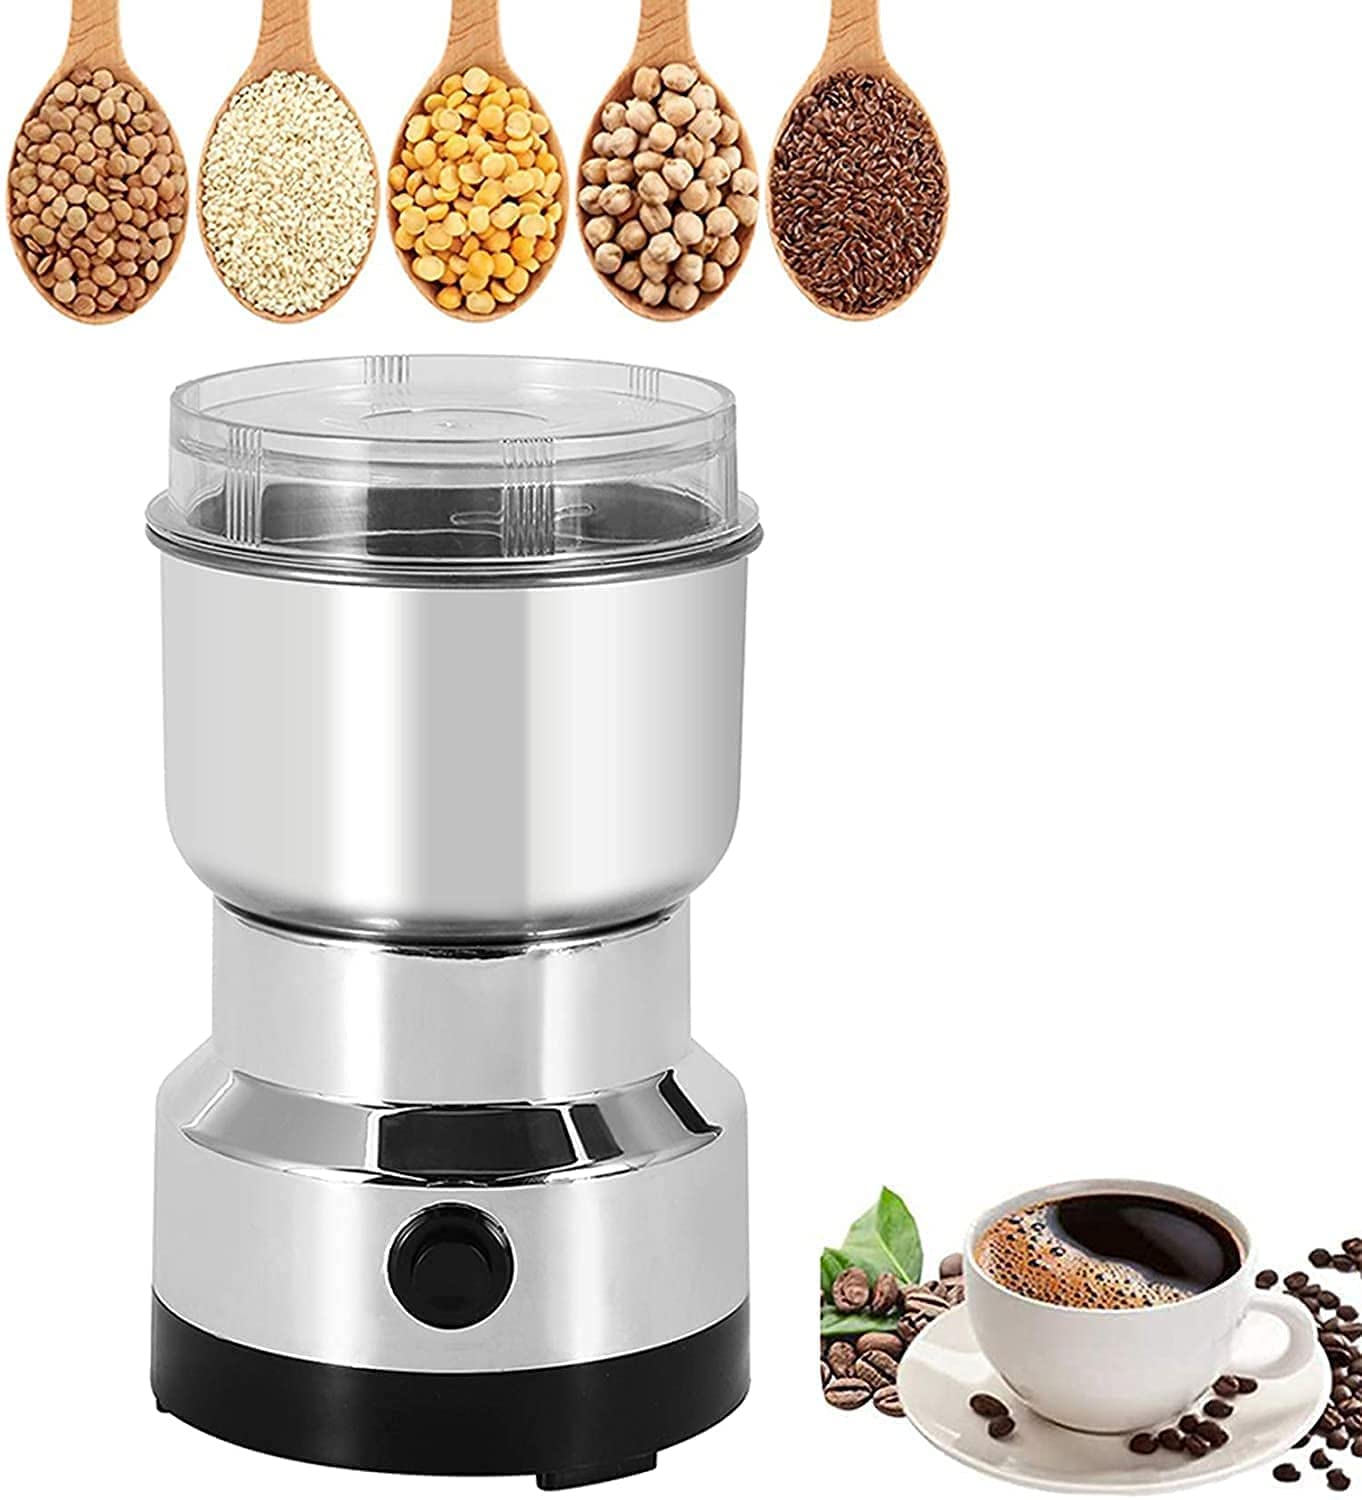 2515B Multi-Functional Electric Stainless Steel Herbs Spices Nuts Grain Grinder with Stainless Steel Bowl, Portable Coffee Bean Seasonings Spices Mill Powder Machine Grinder Machine for Home and Office